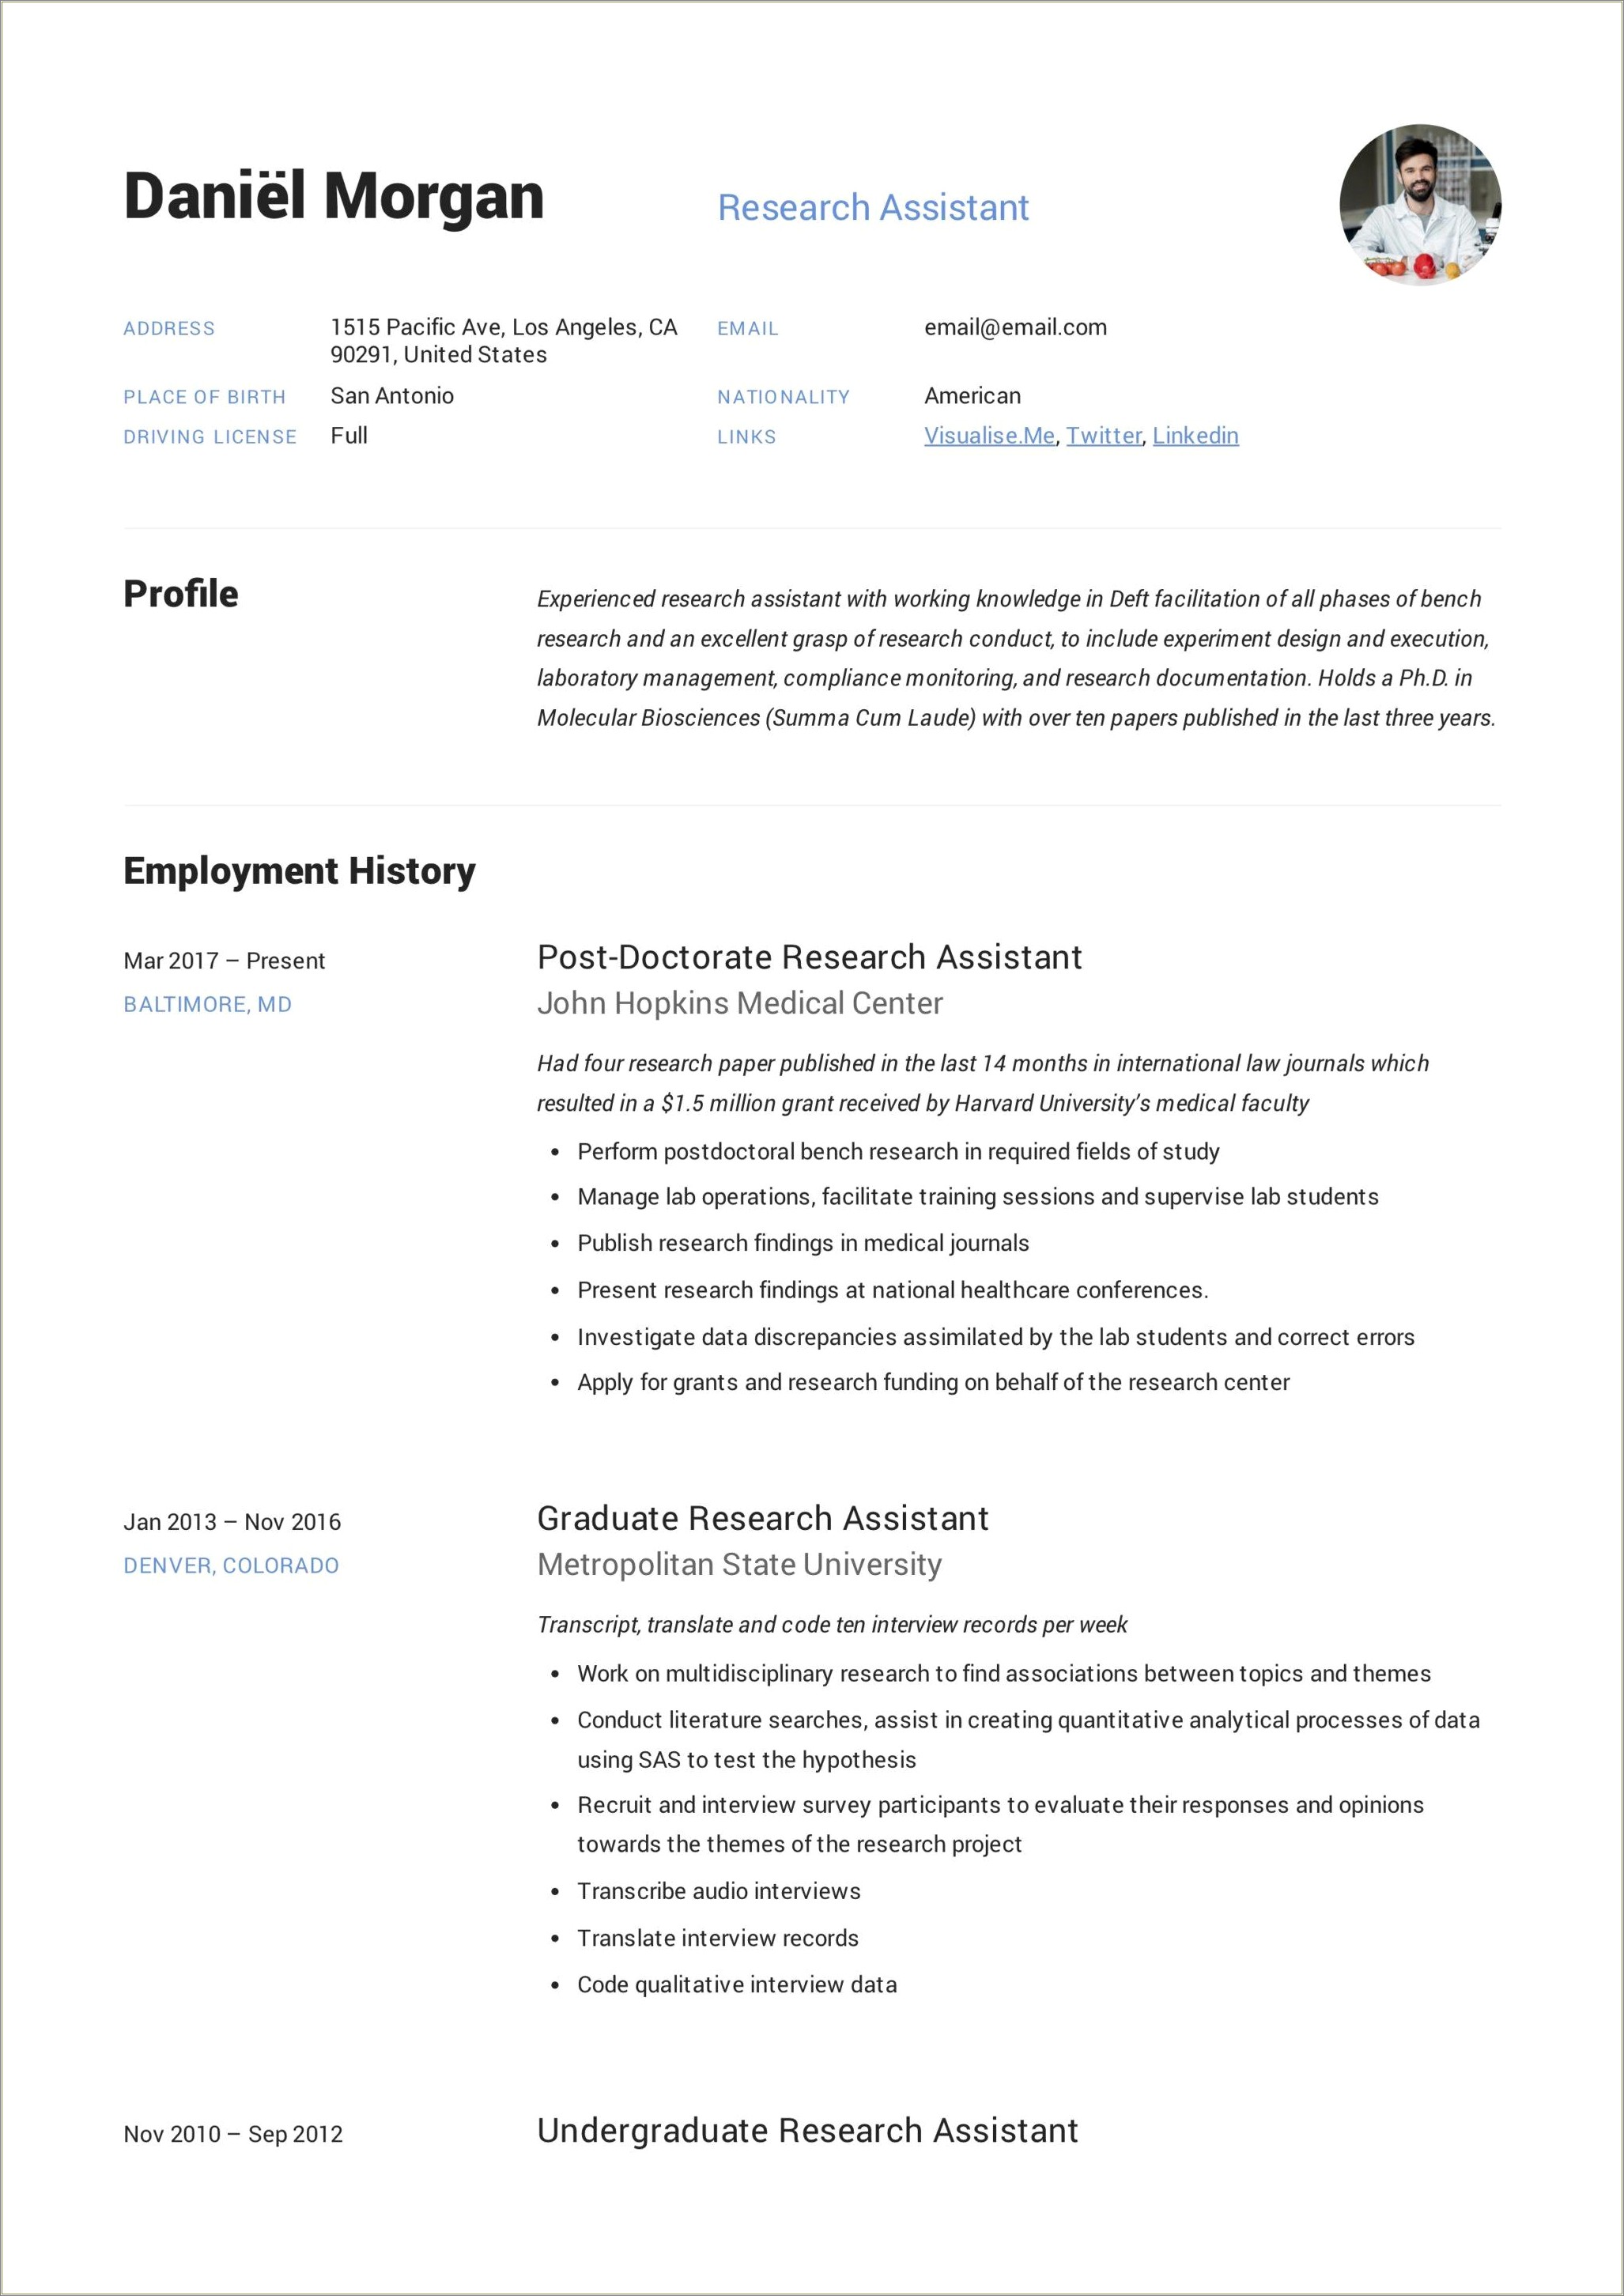 Resume Objective For Research Assistant Position